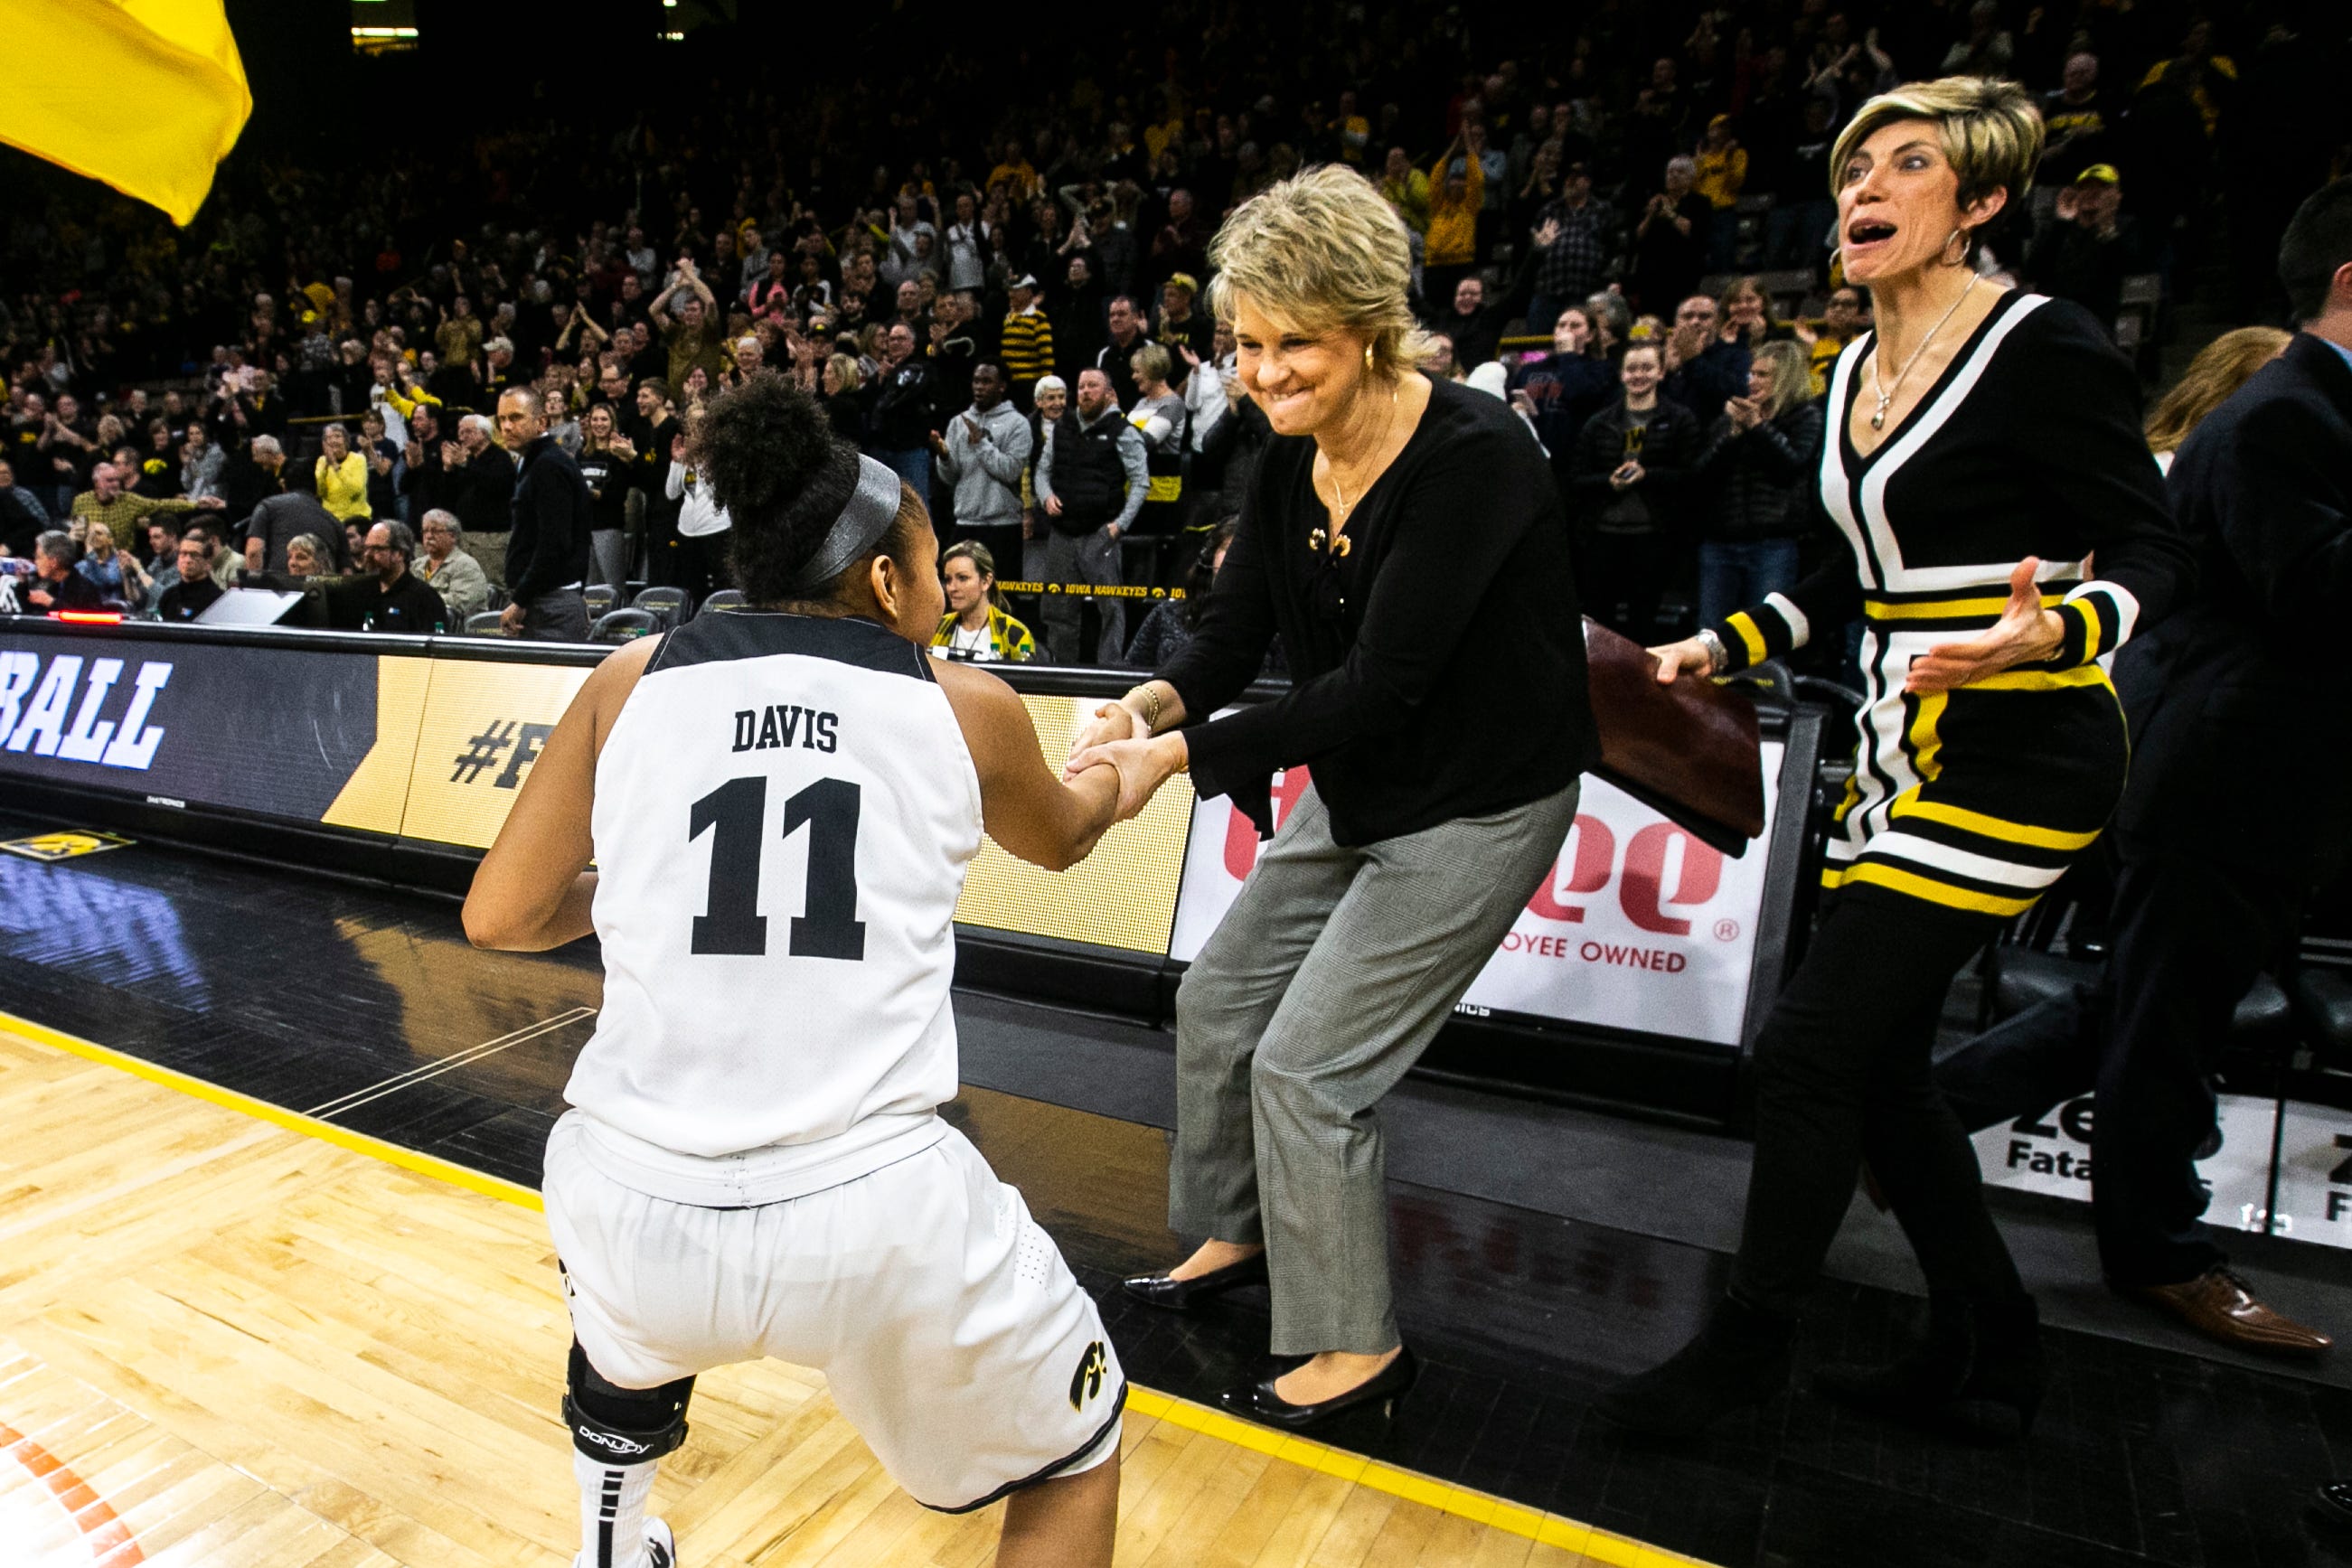 Iowa guard Tania Davis (11) shakes hands with Iowa head coach Lisa Bluder as Jan Jensen celebrates after a NCAA Big Ten Conference women's basketball game on Wednesday, Jan. 23, 2019, at Carver-Hawkeye Arena in Iowa City, Iowa.  The Hawkeyes defeated Rutgers' Scarlet Knights, 72-66.